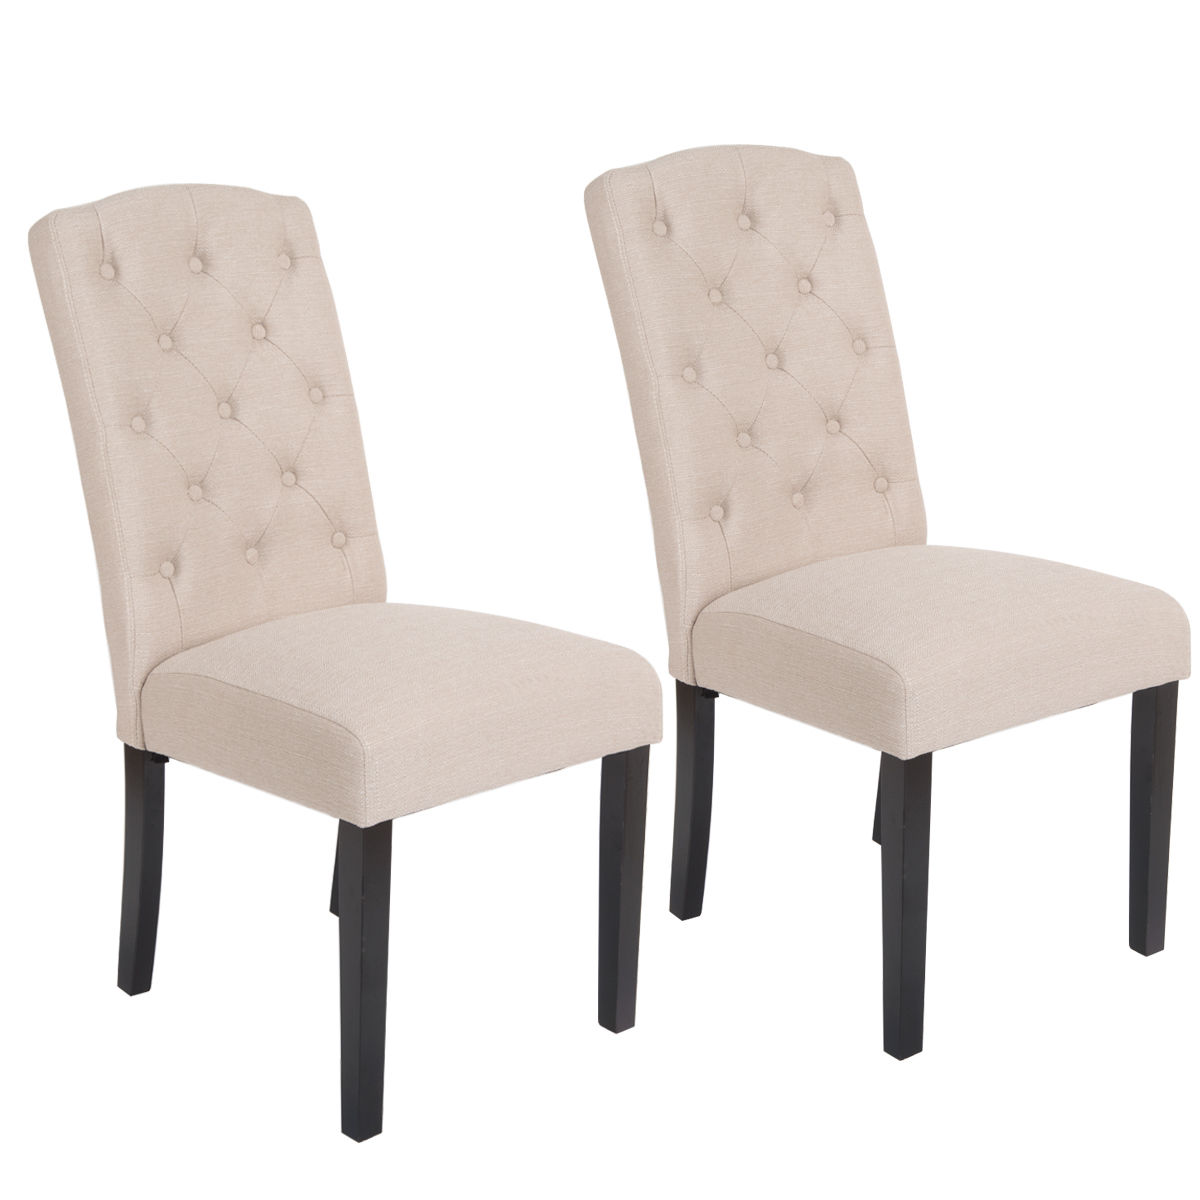 Kitchen Dining Room Chairs